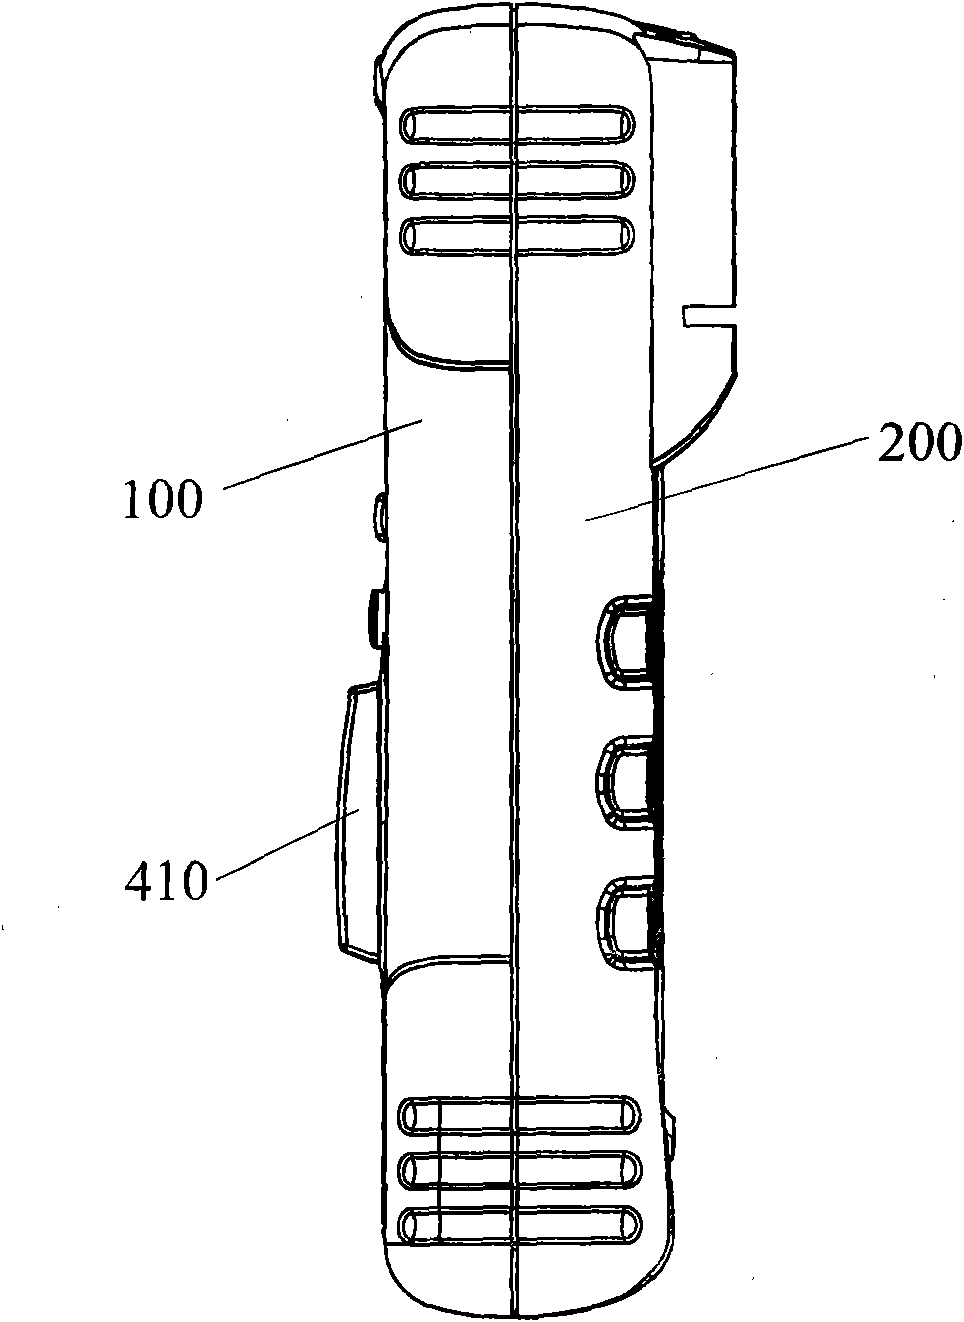 Multi-functional measurement instrument with safety protection device